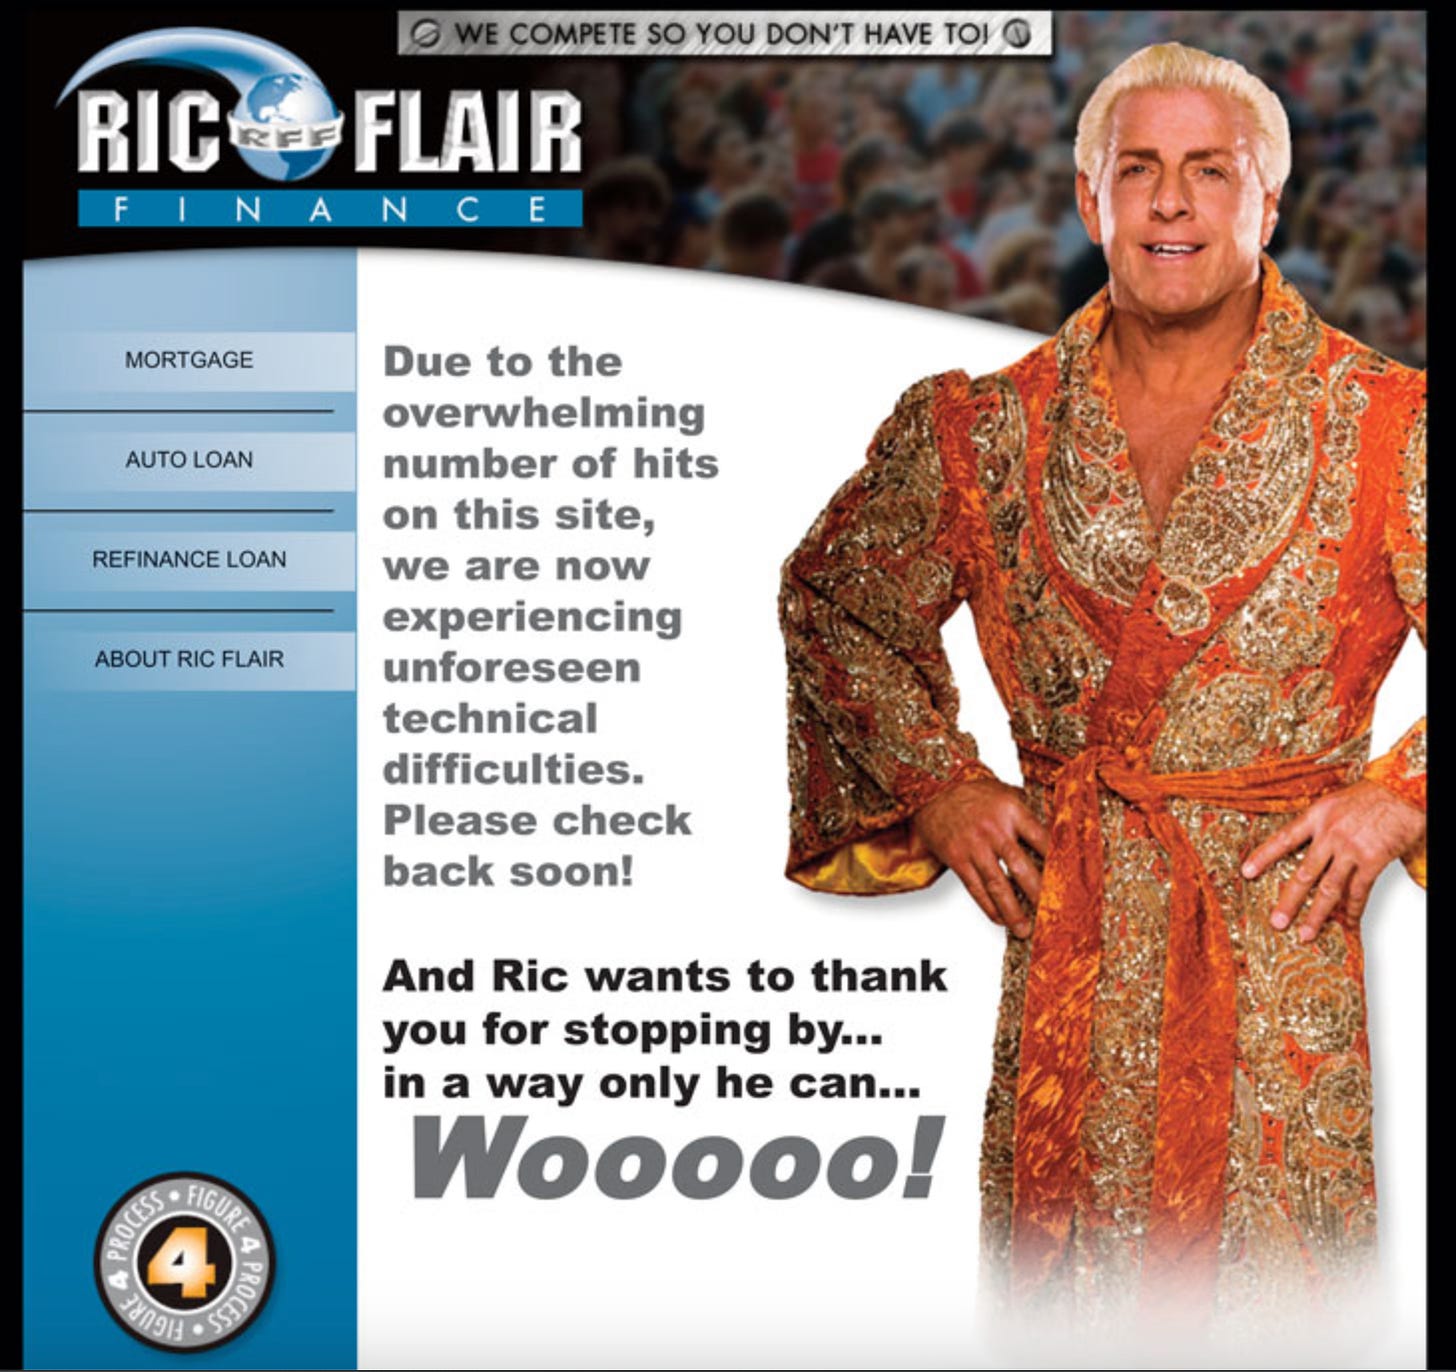 Ric Flair Finance home page in 2007